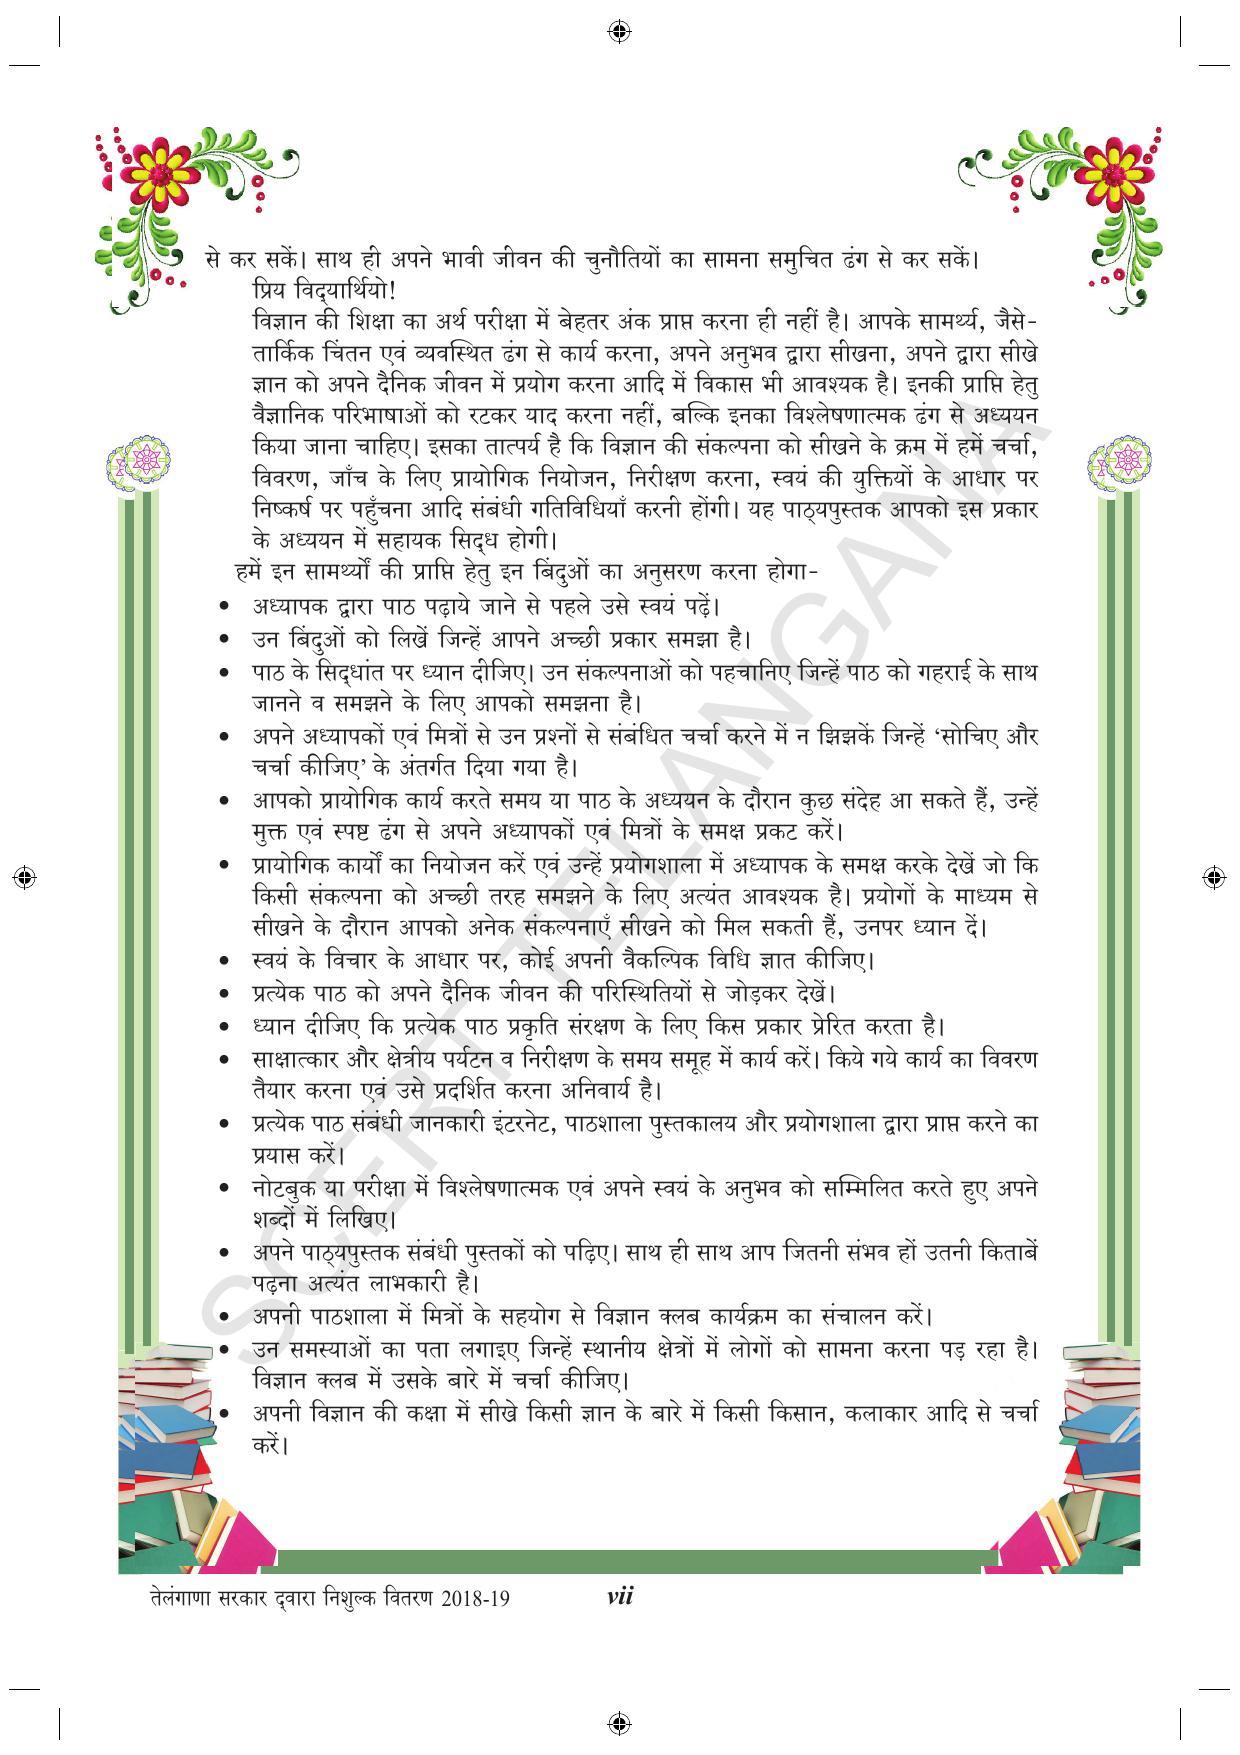 TS SCERT Class 9 Biological Science (Hindi Medium) Text Book - Page 9